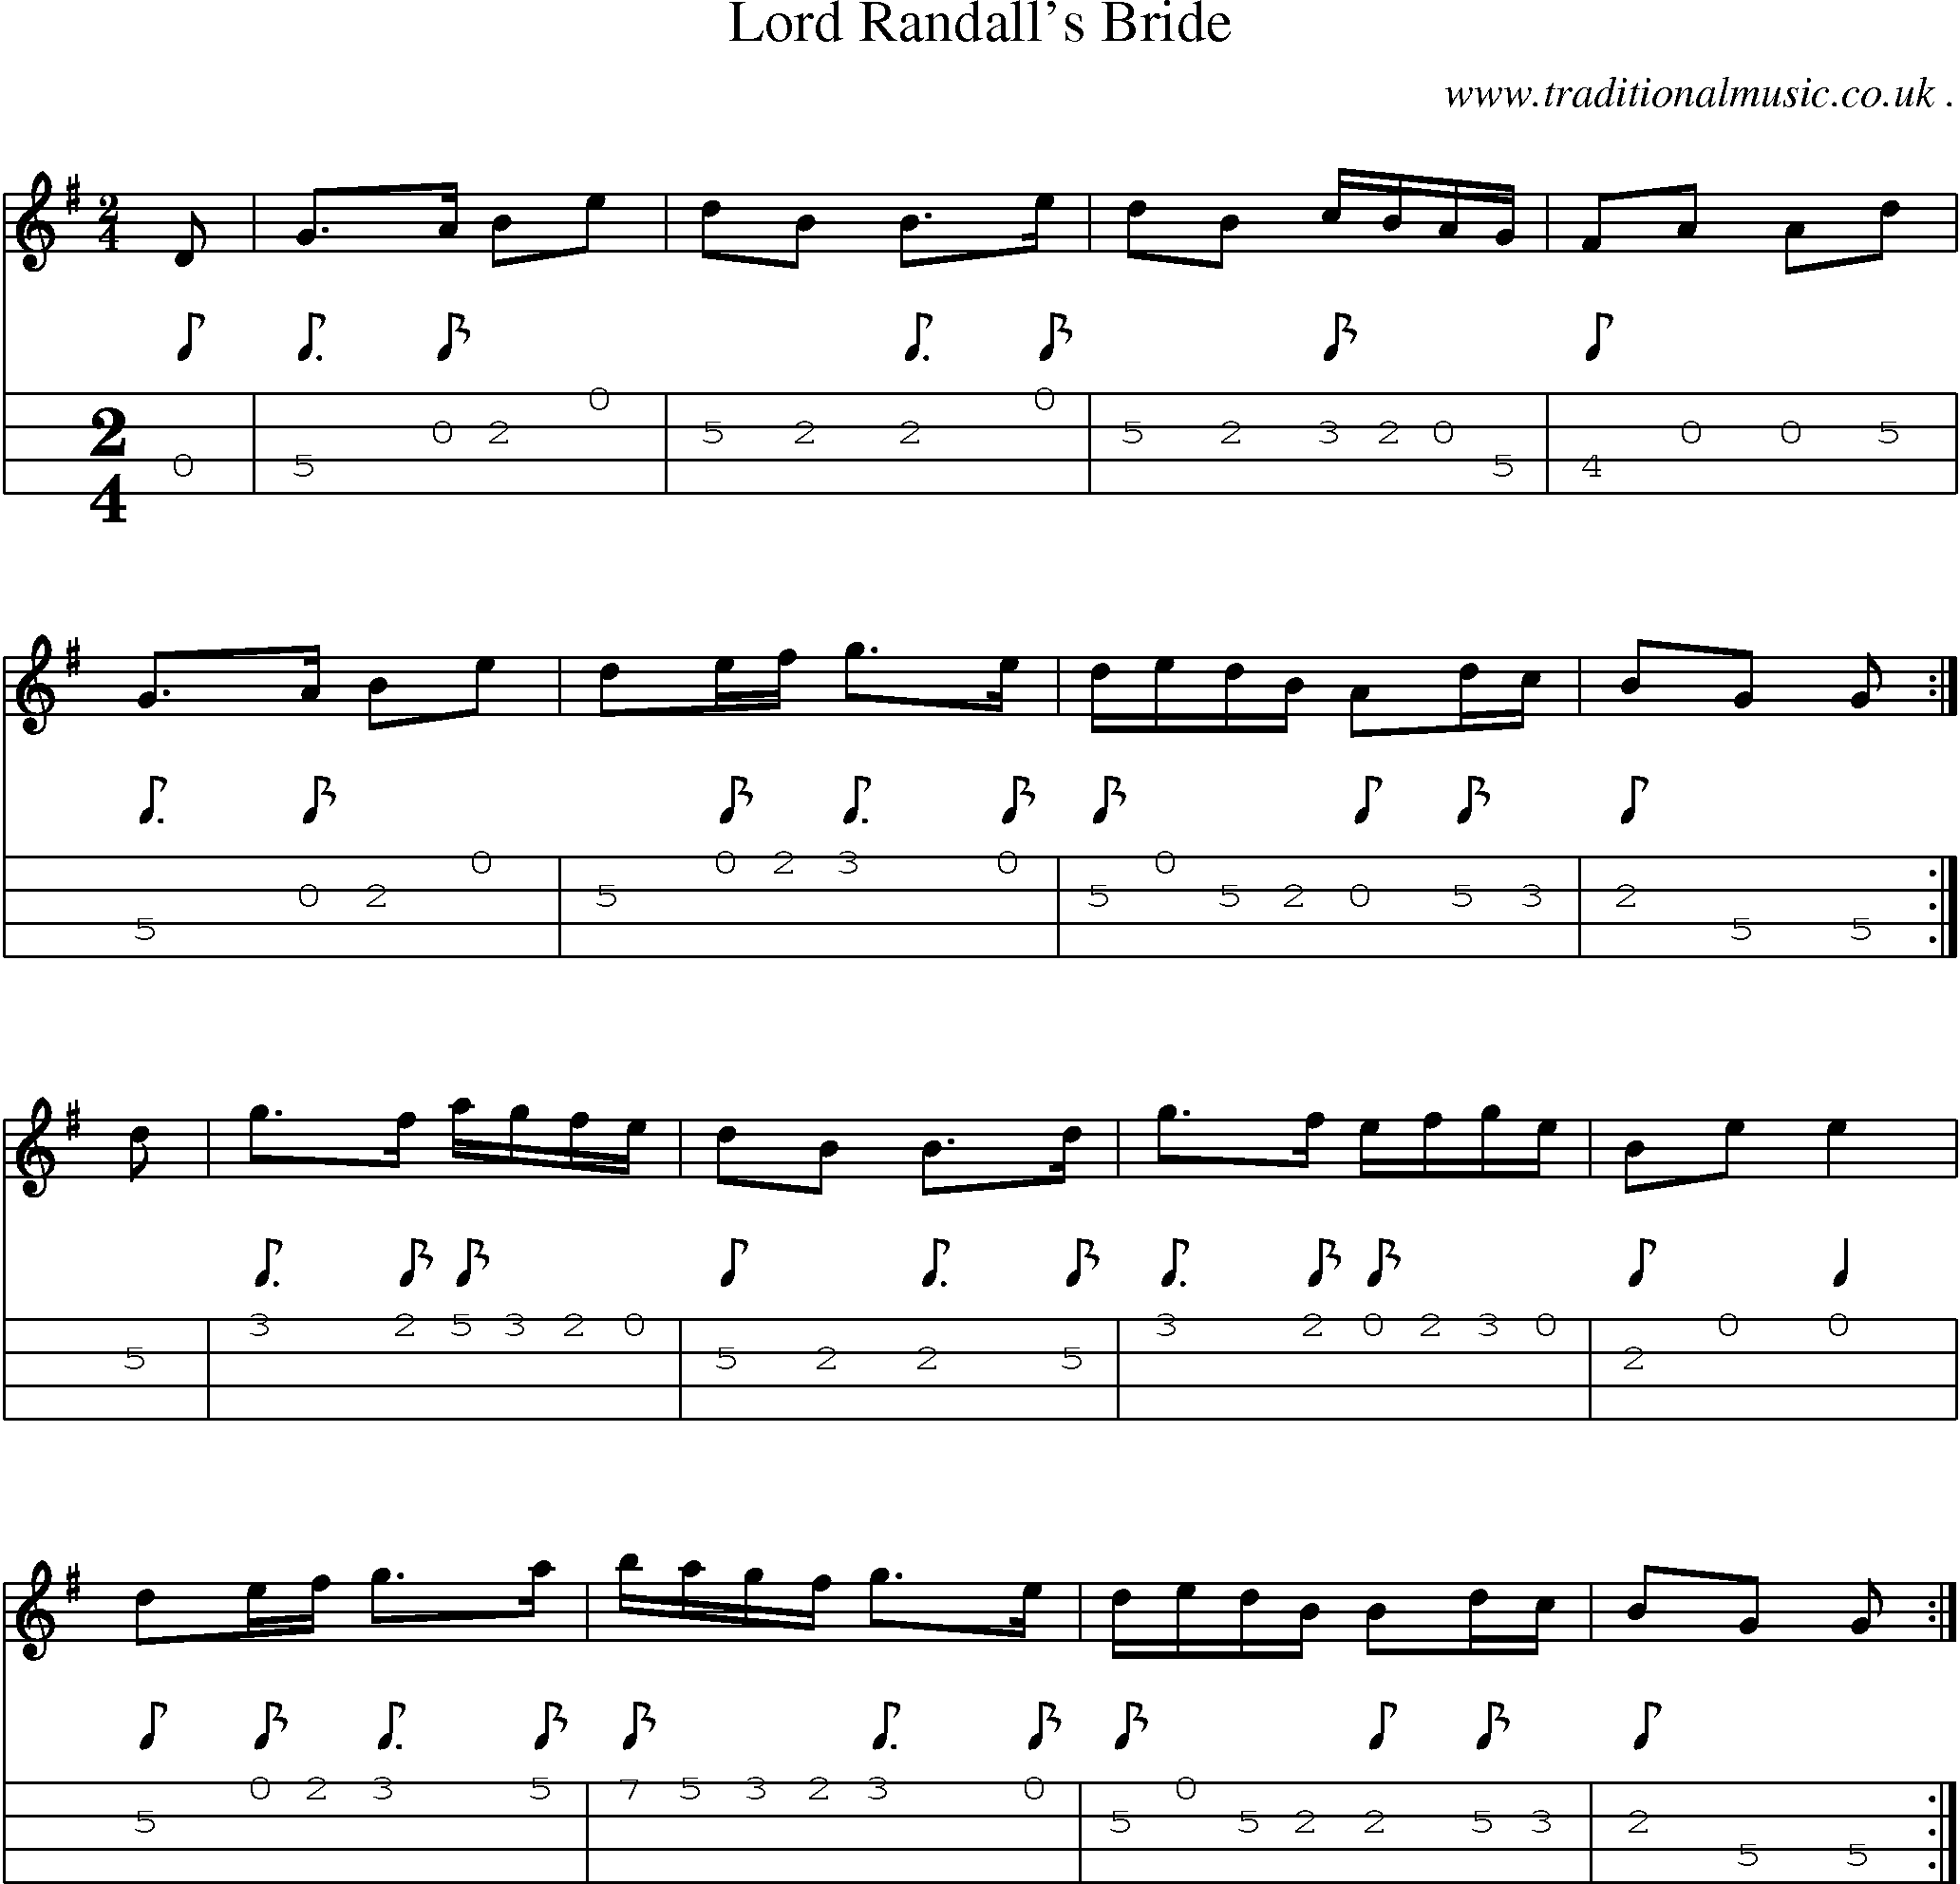 Sheet-music  score, Chords and Mandolin Tabs for Lord Randalls Bride